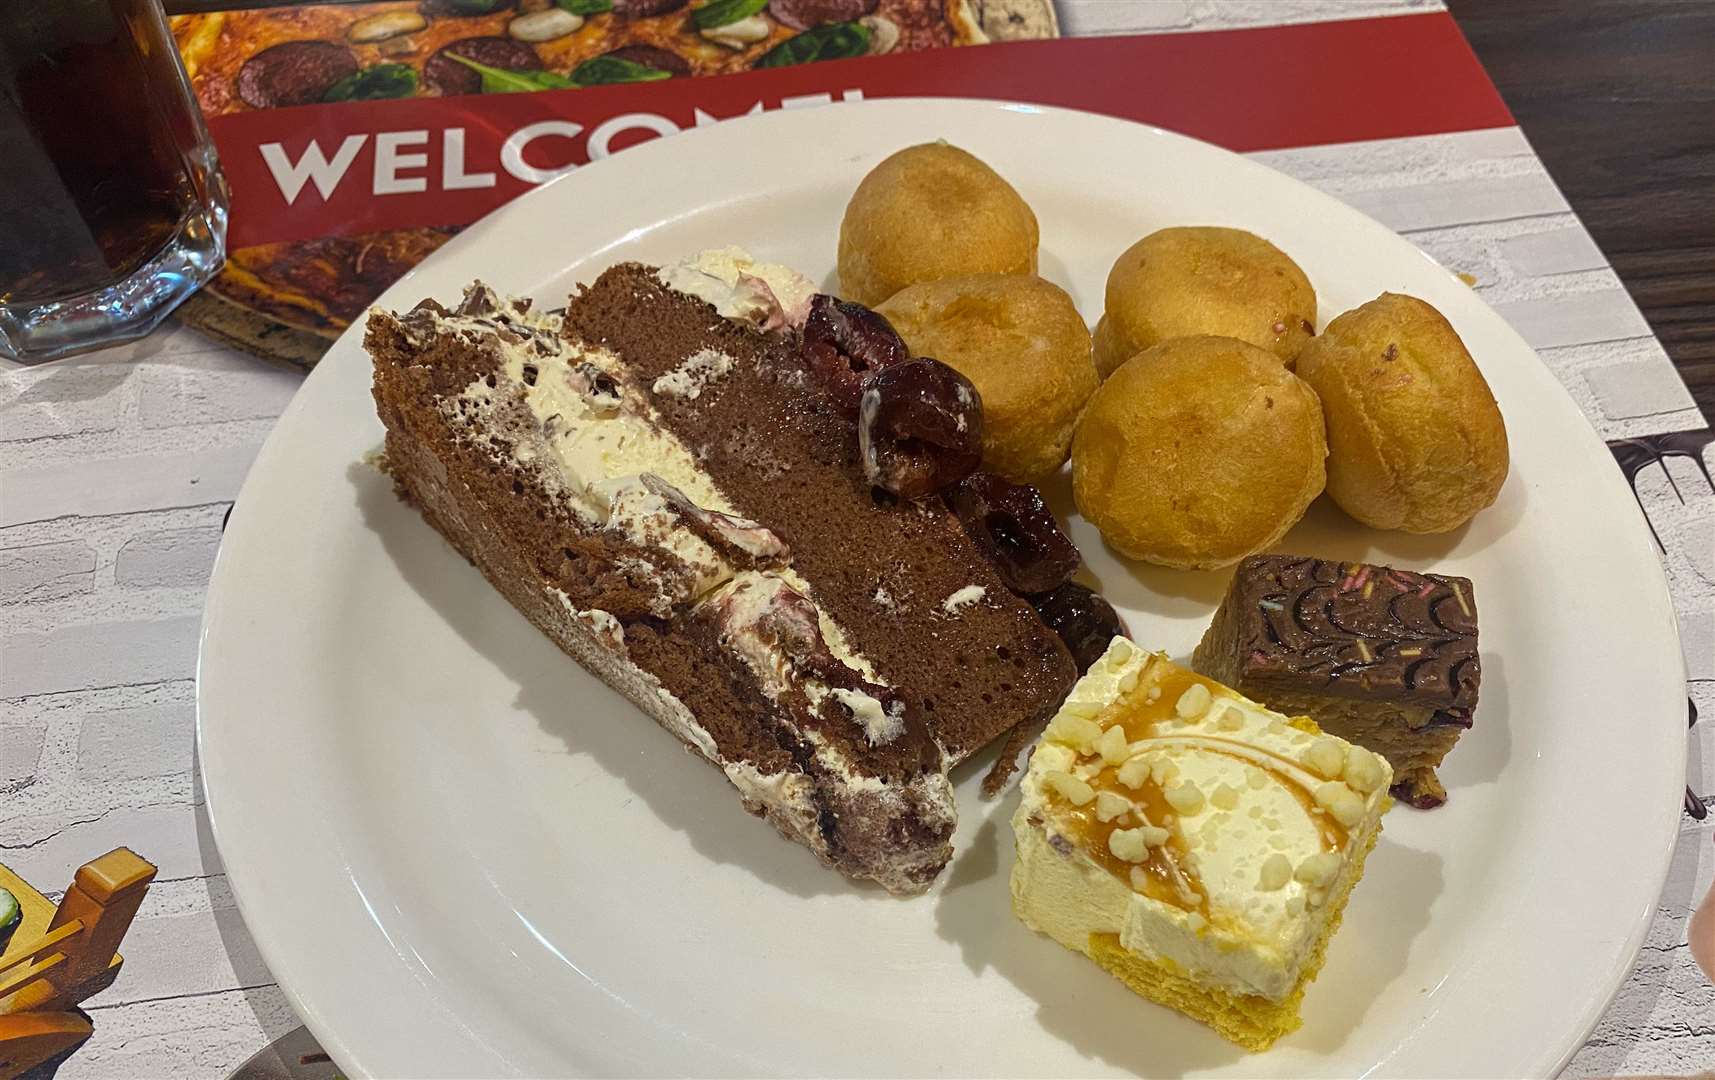 There's always room for dessert, especially when Black Forest gateau and profiteroles are on offer. Picture: Sam Lawrie